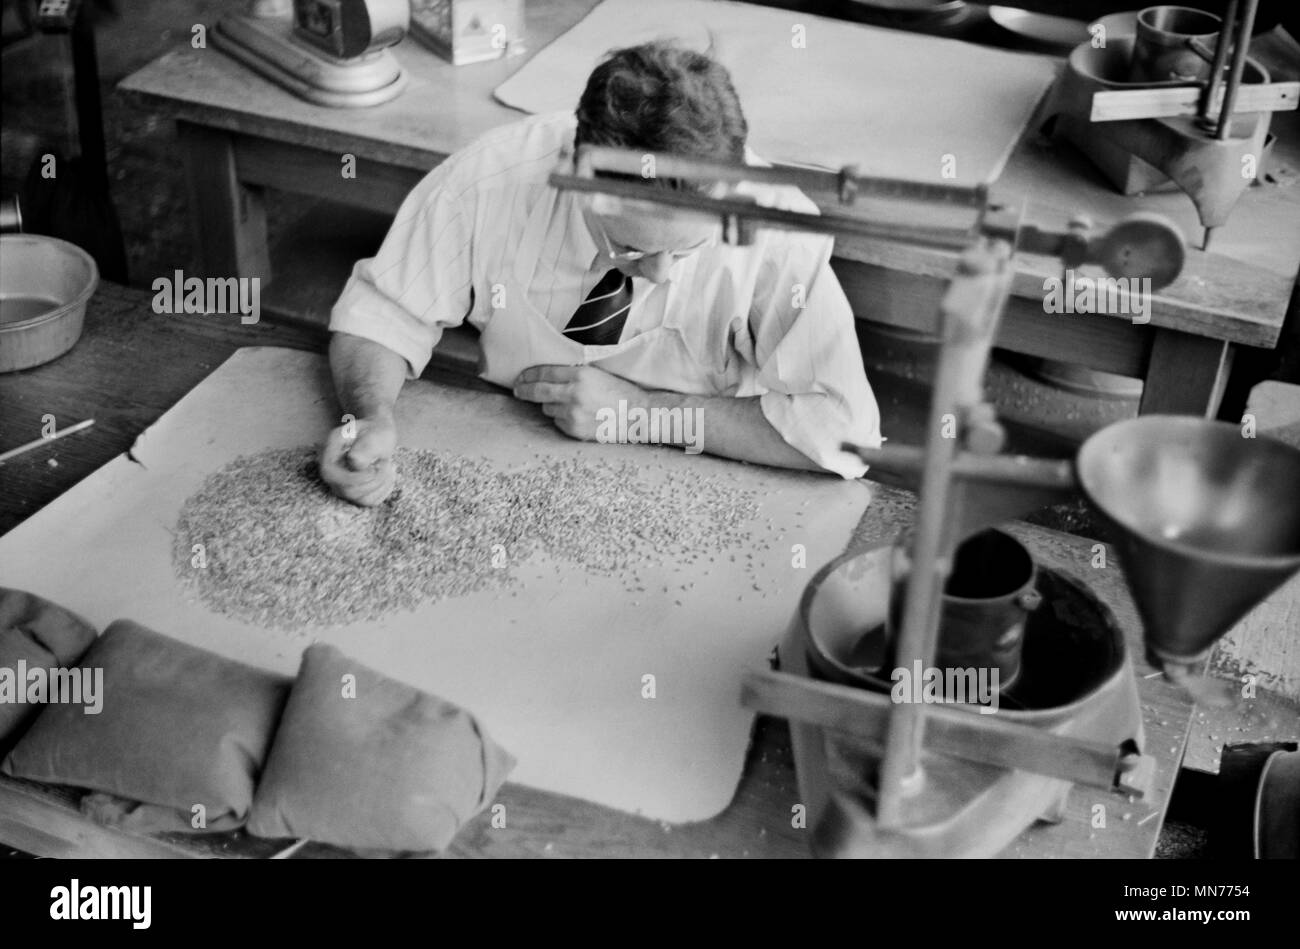 Worker Testing for Impurities in Wheat at Grain Inspection Department, Minneapolis, Minnesota, USA, John Vachon for Farm Security Administration, September 1939 Stock Photo